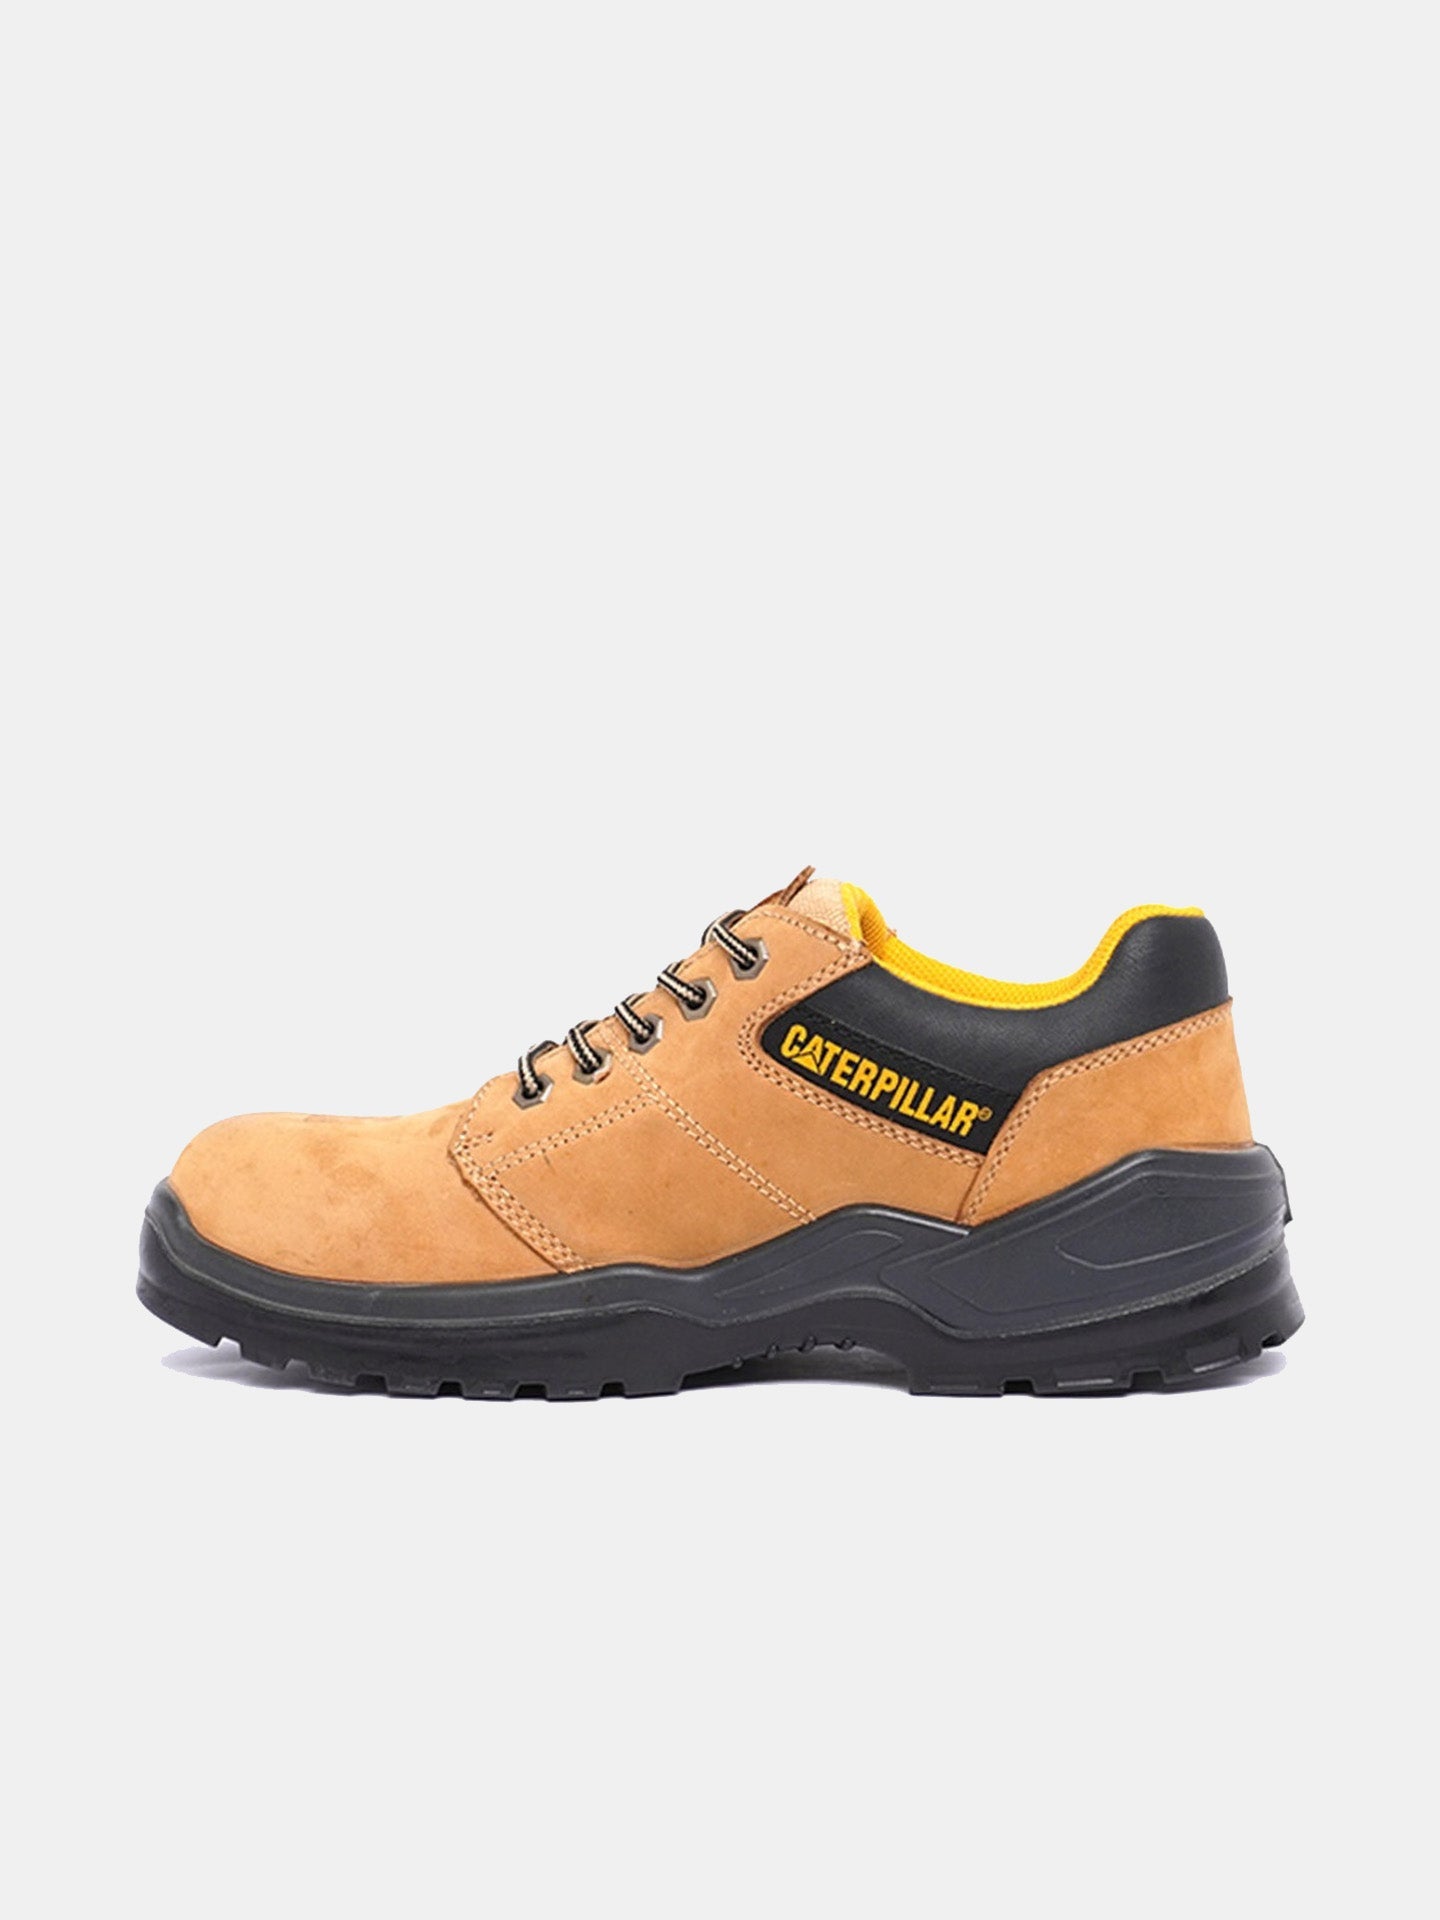 Caterpillar Men's Striver Lo ST S3 S Safety Shoes #color_Yellow